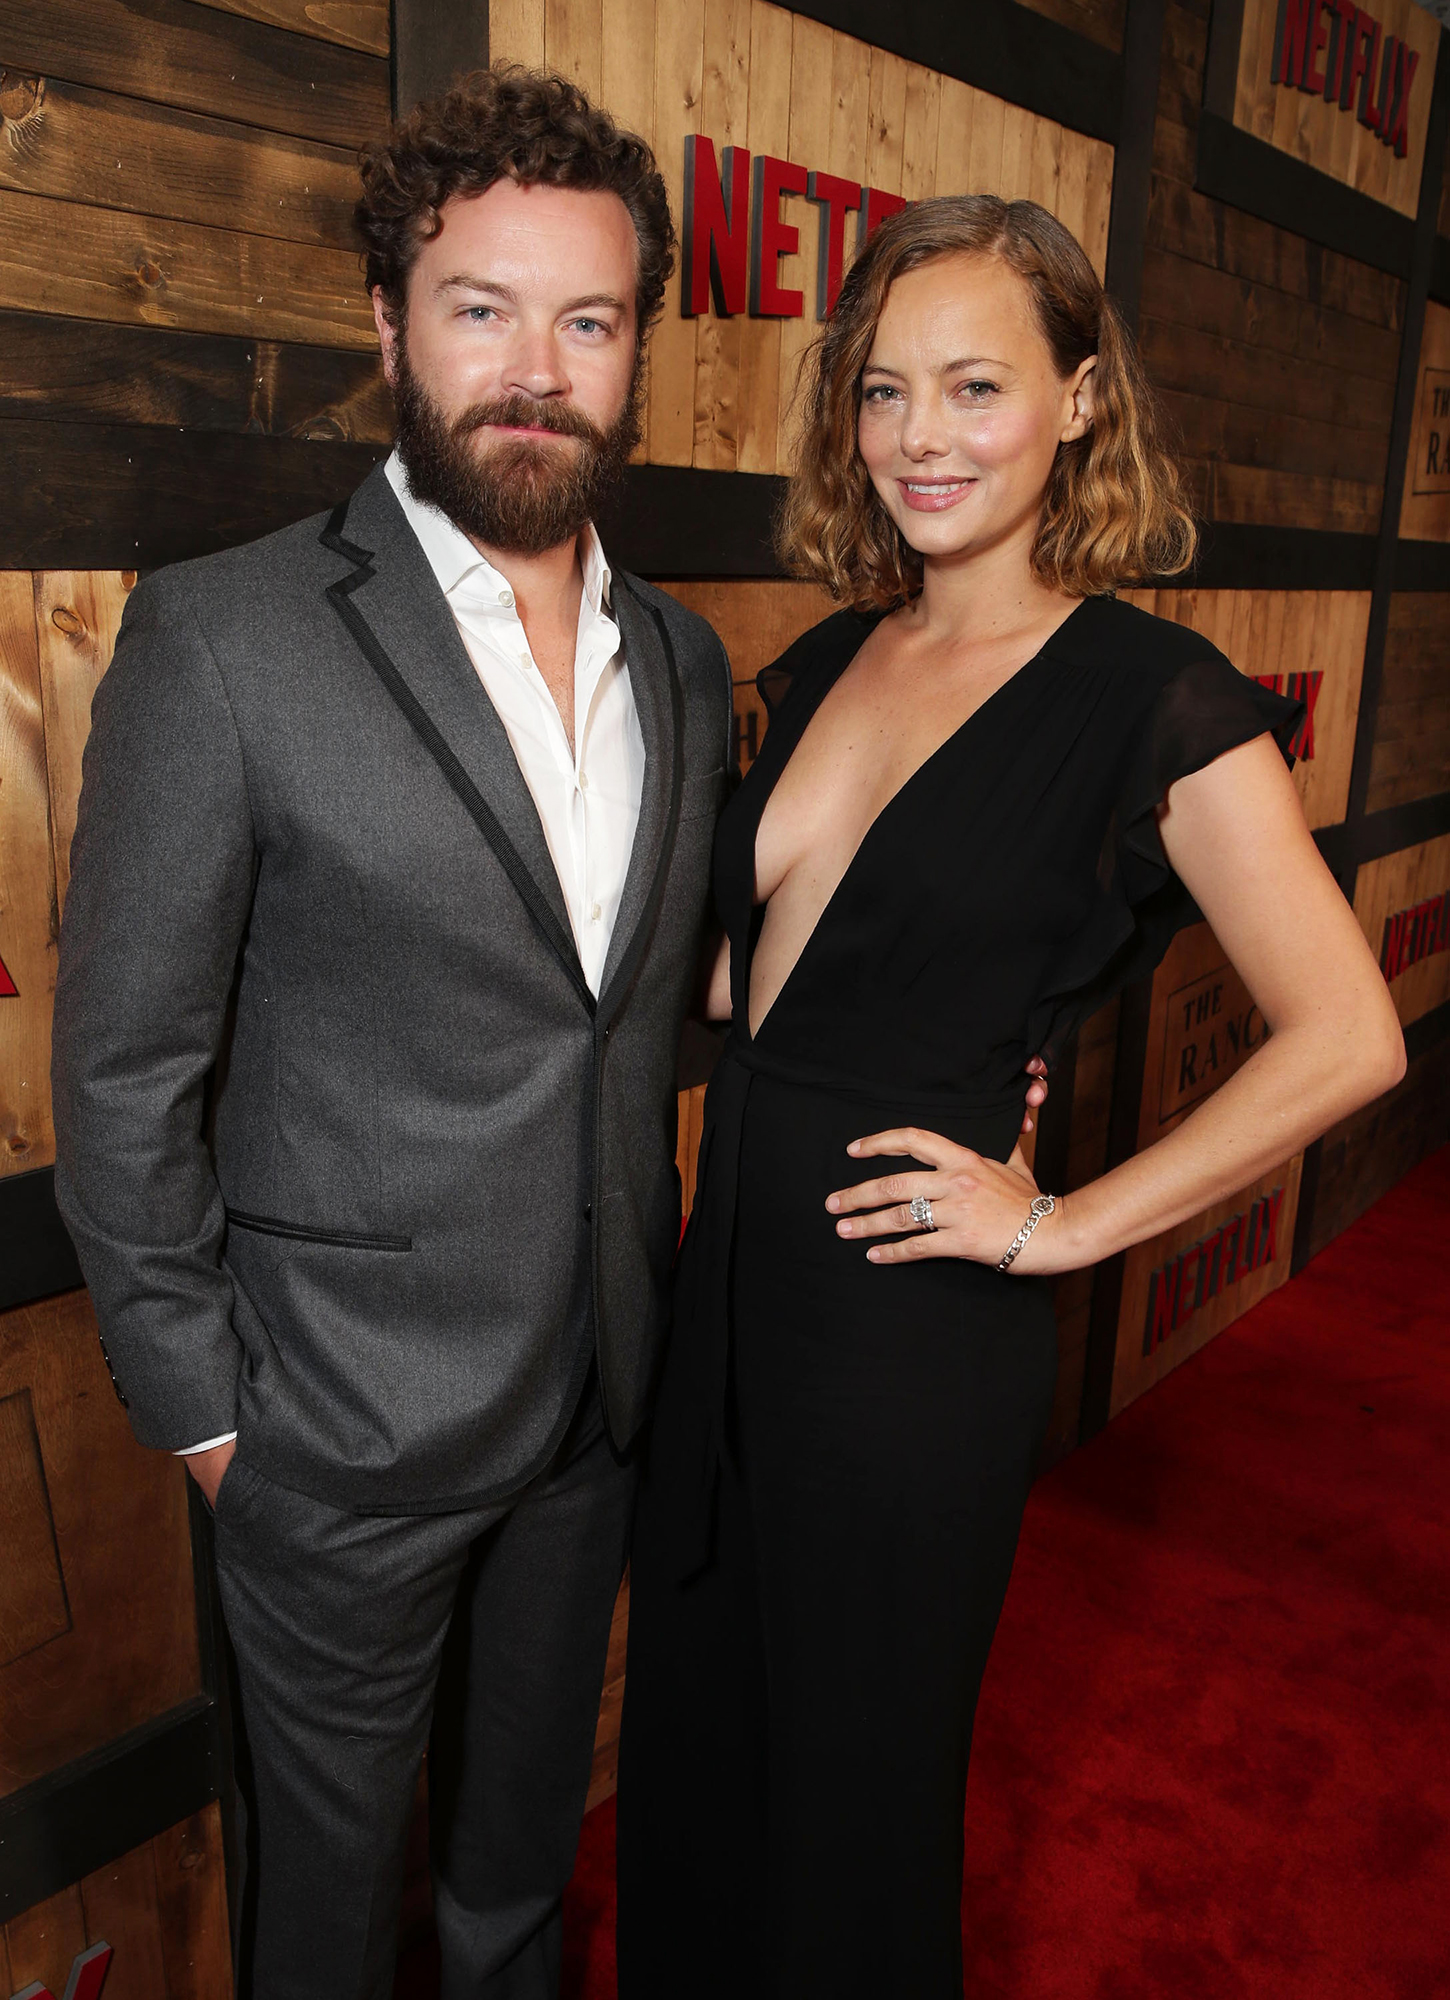 Danny Masterson and Bijou Phillips Relationship Timeline Photos photo pic image